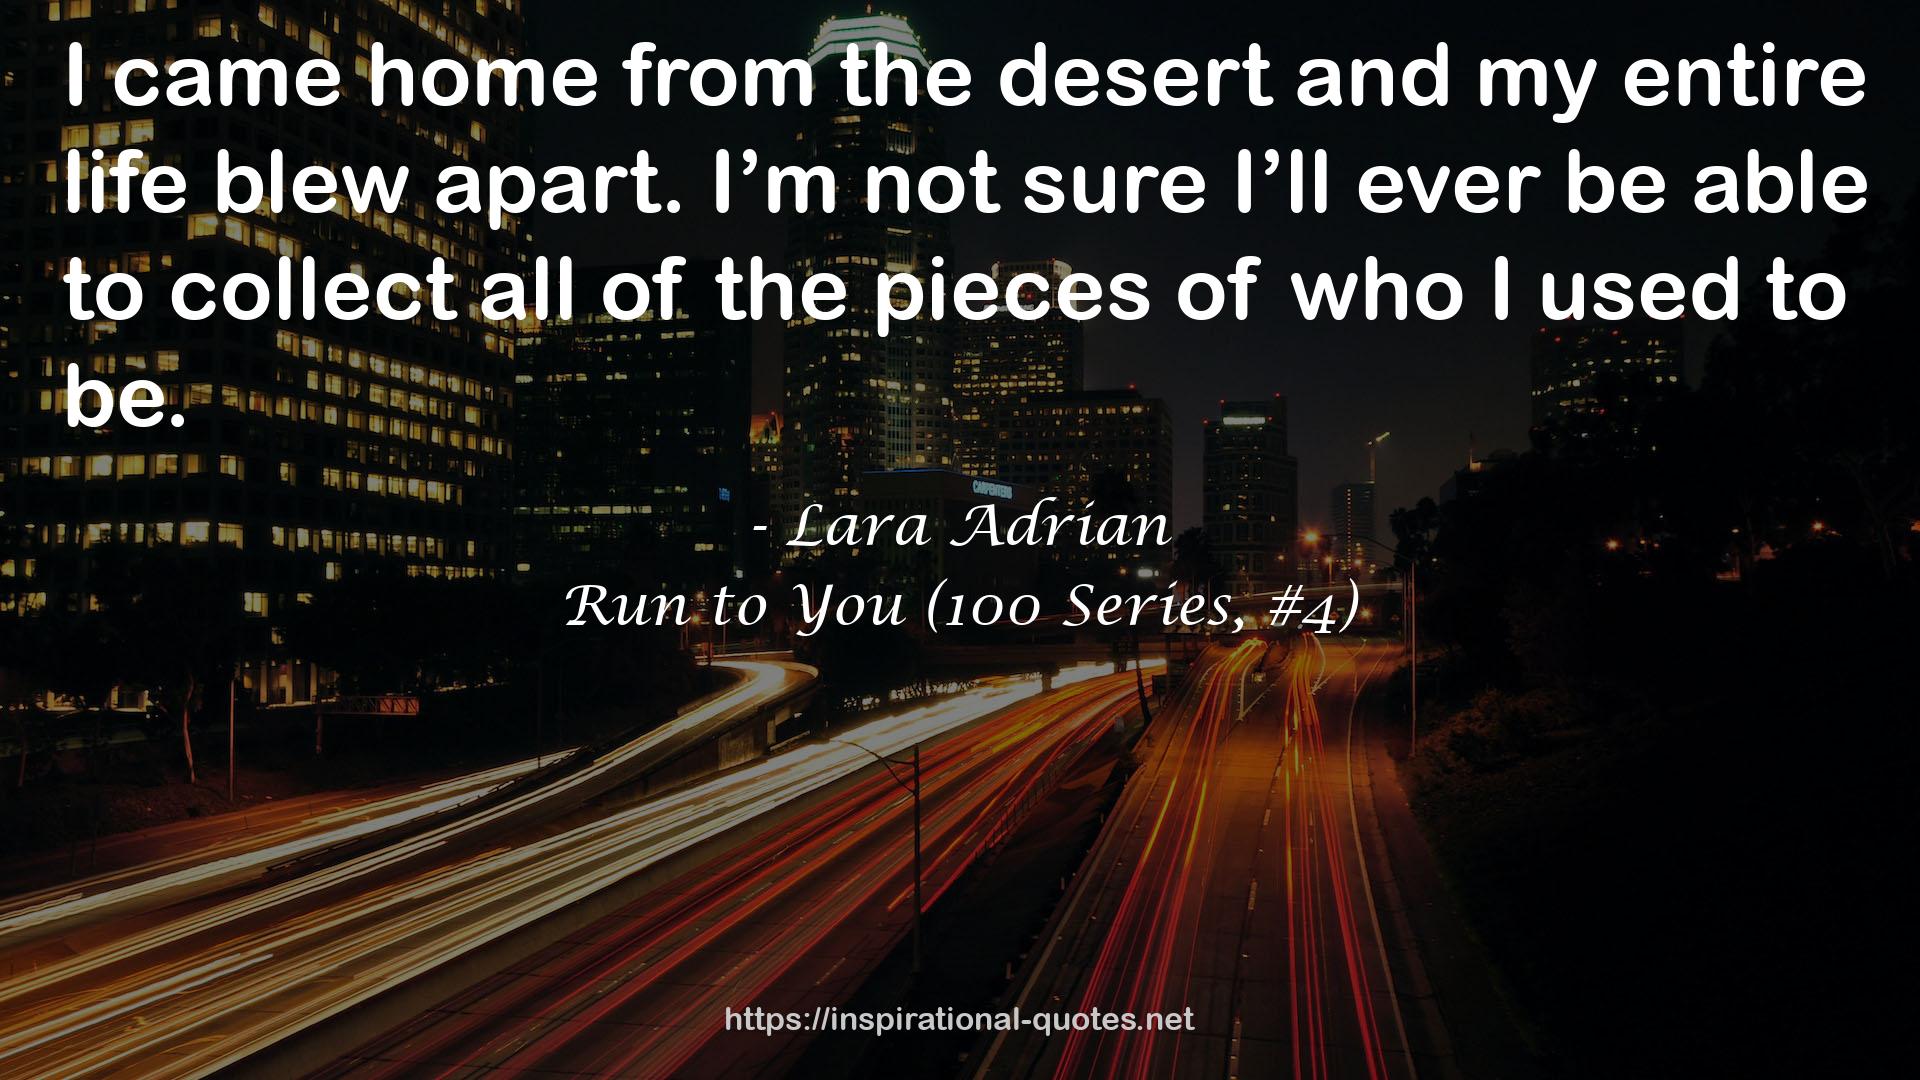 Run to You (100 Series, #4) QUOTES